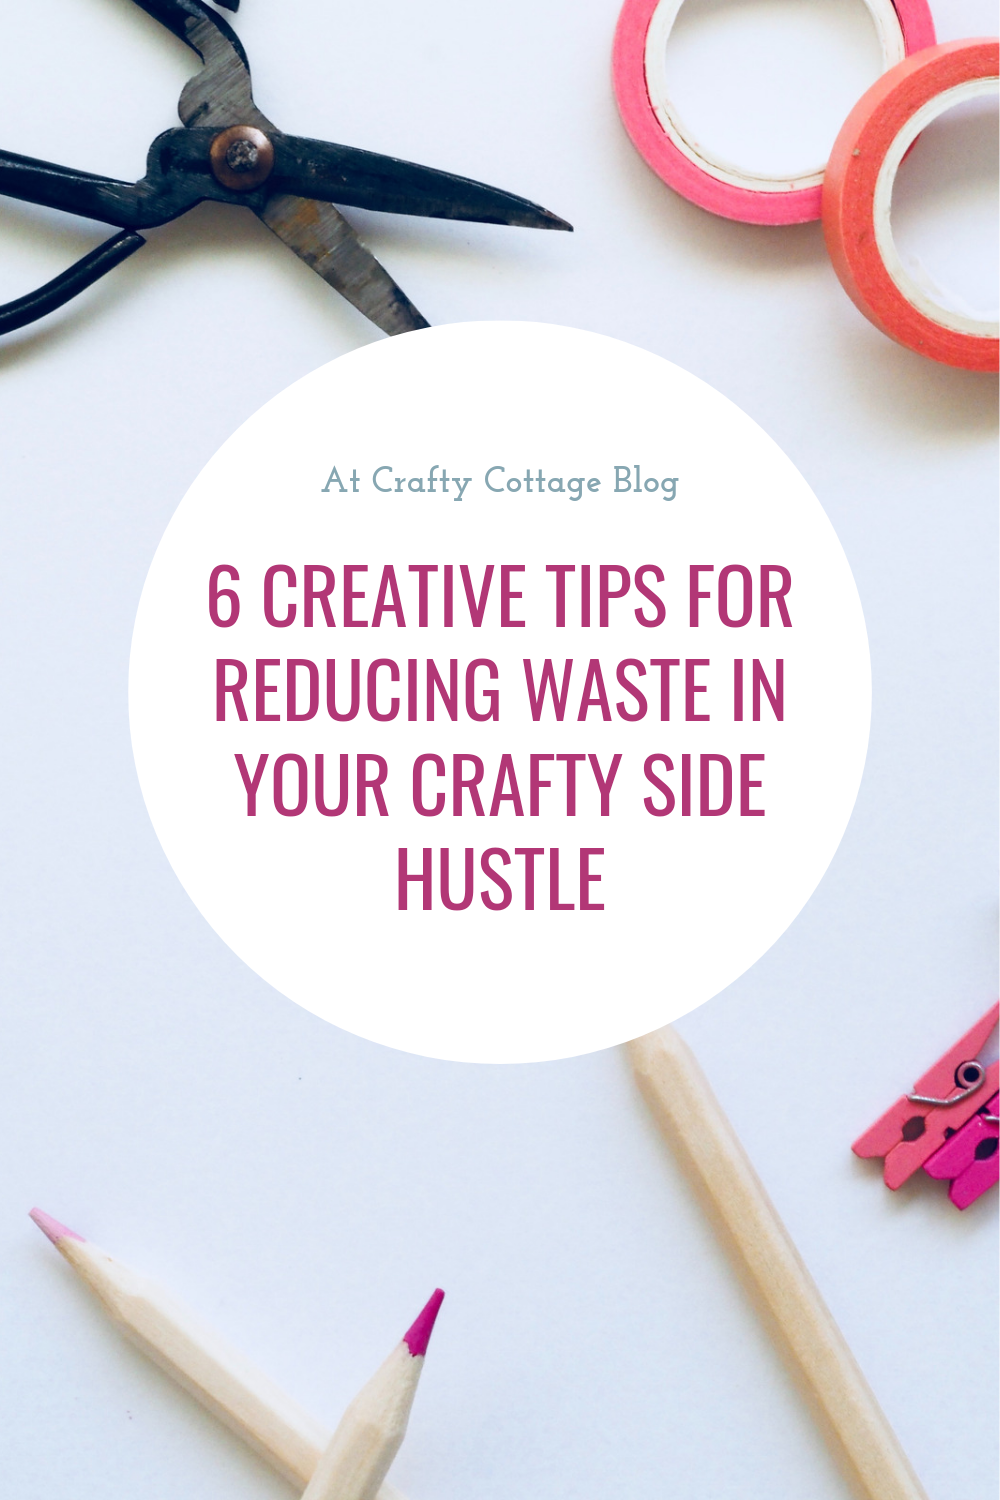 6 Creative Tips for Reducing Waste in Your Crafty Side Hustle